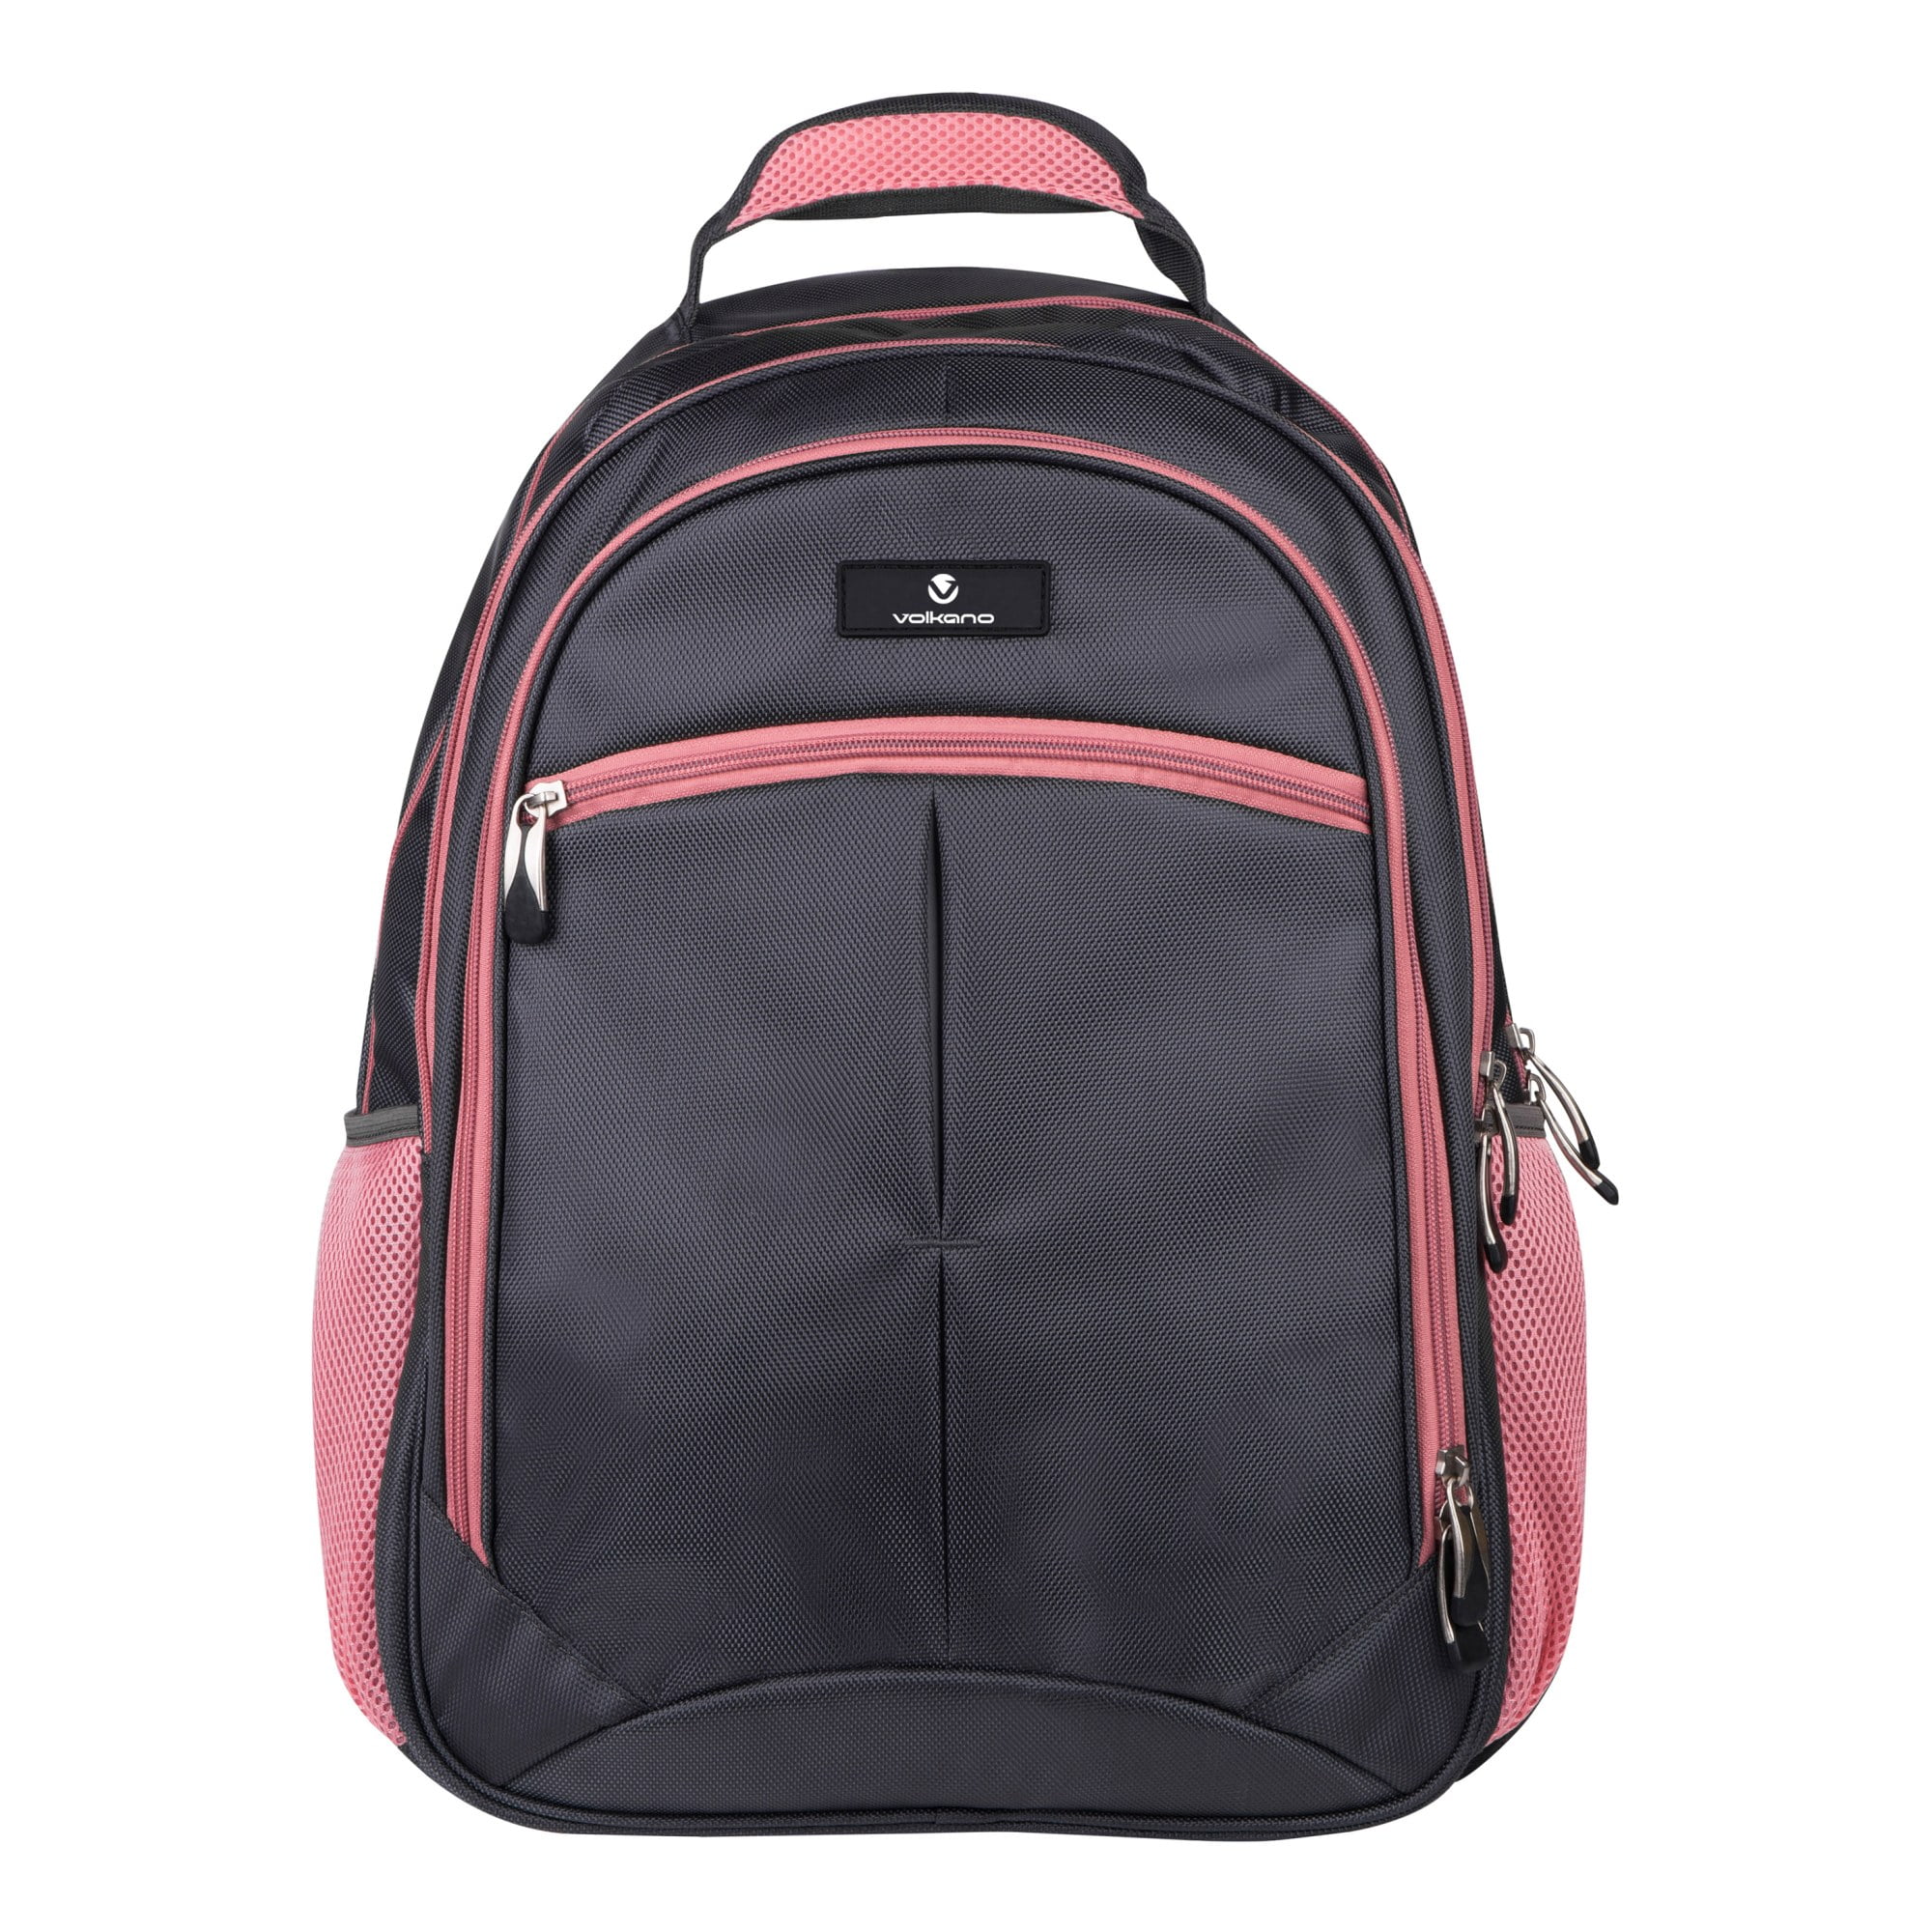 Volkano Orthopedic Backpack With 15.6 Laptop Compartment, Gray/Pink